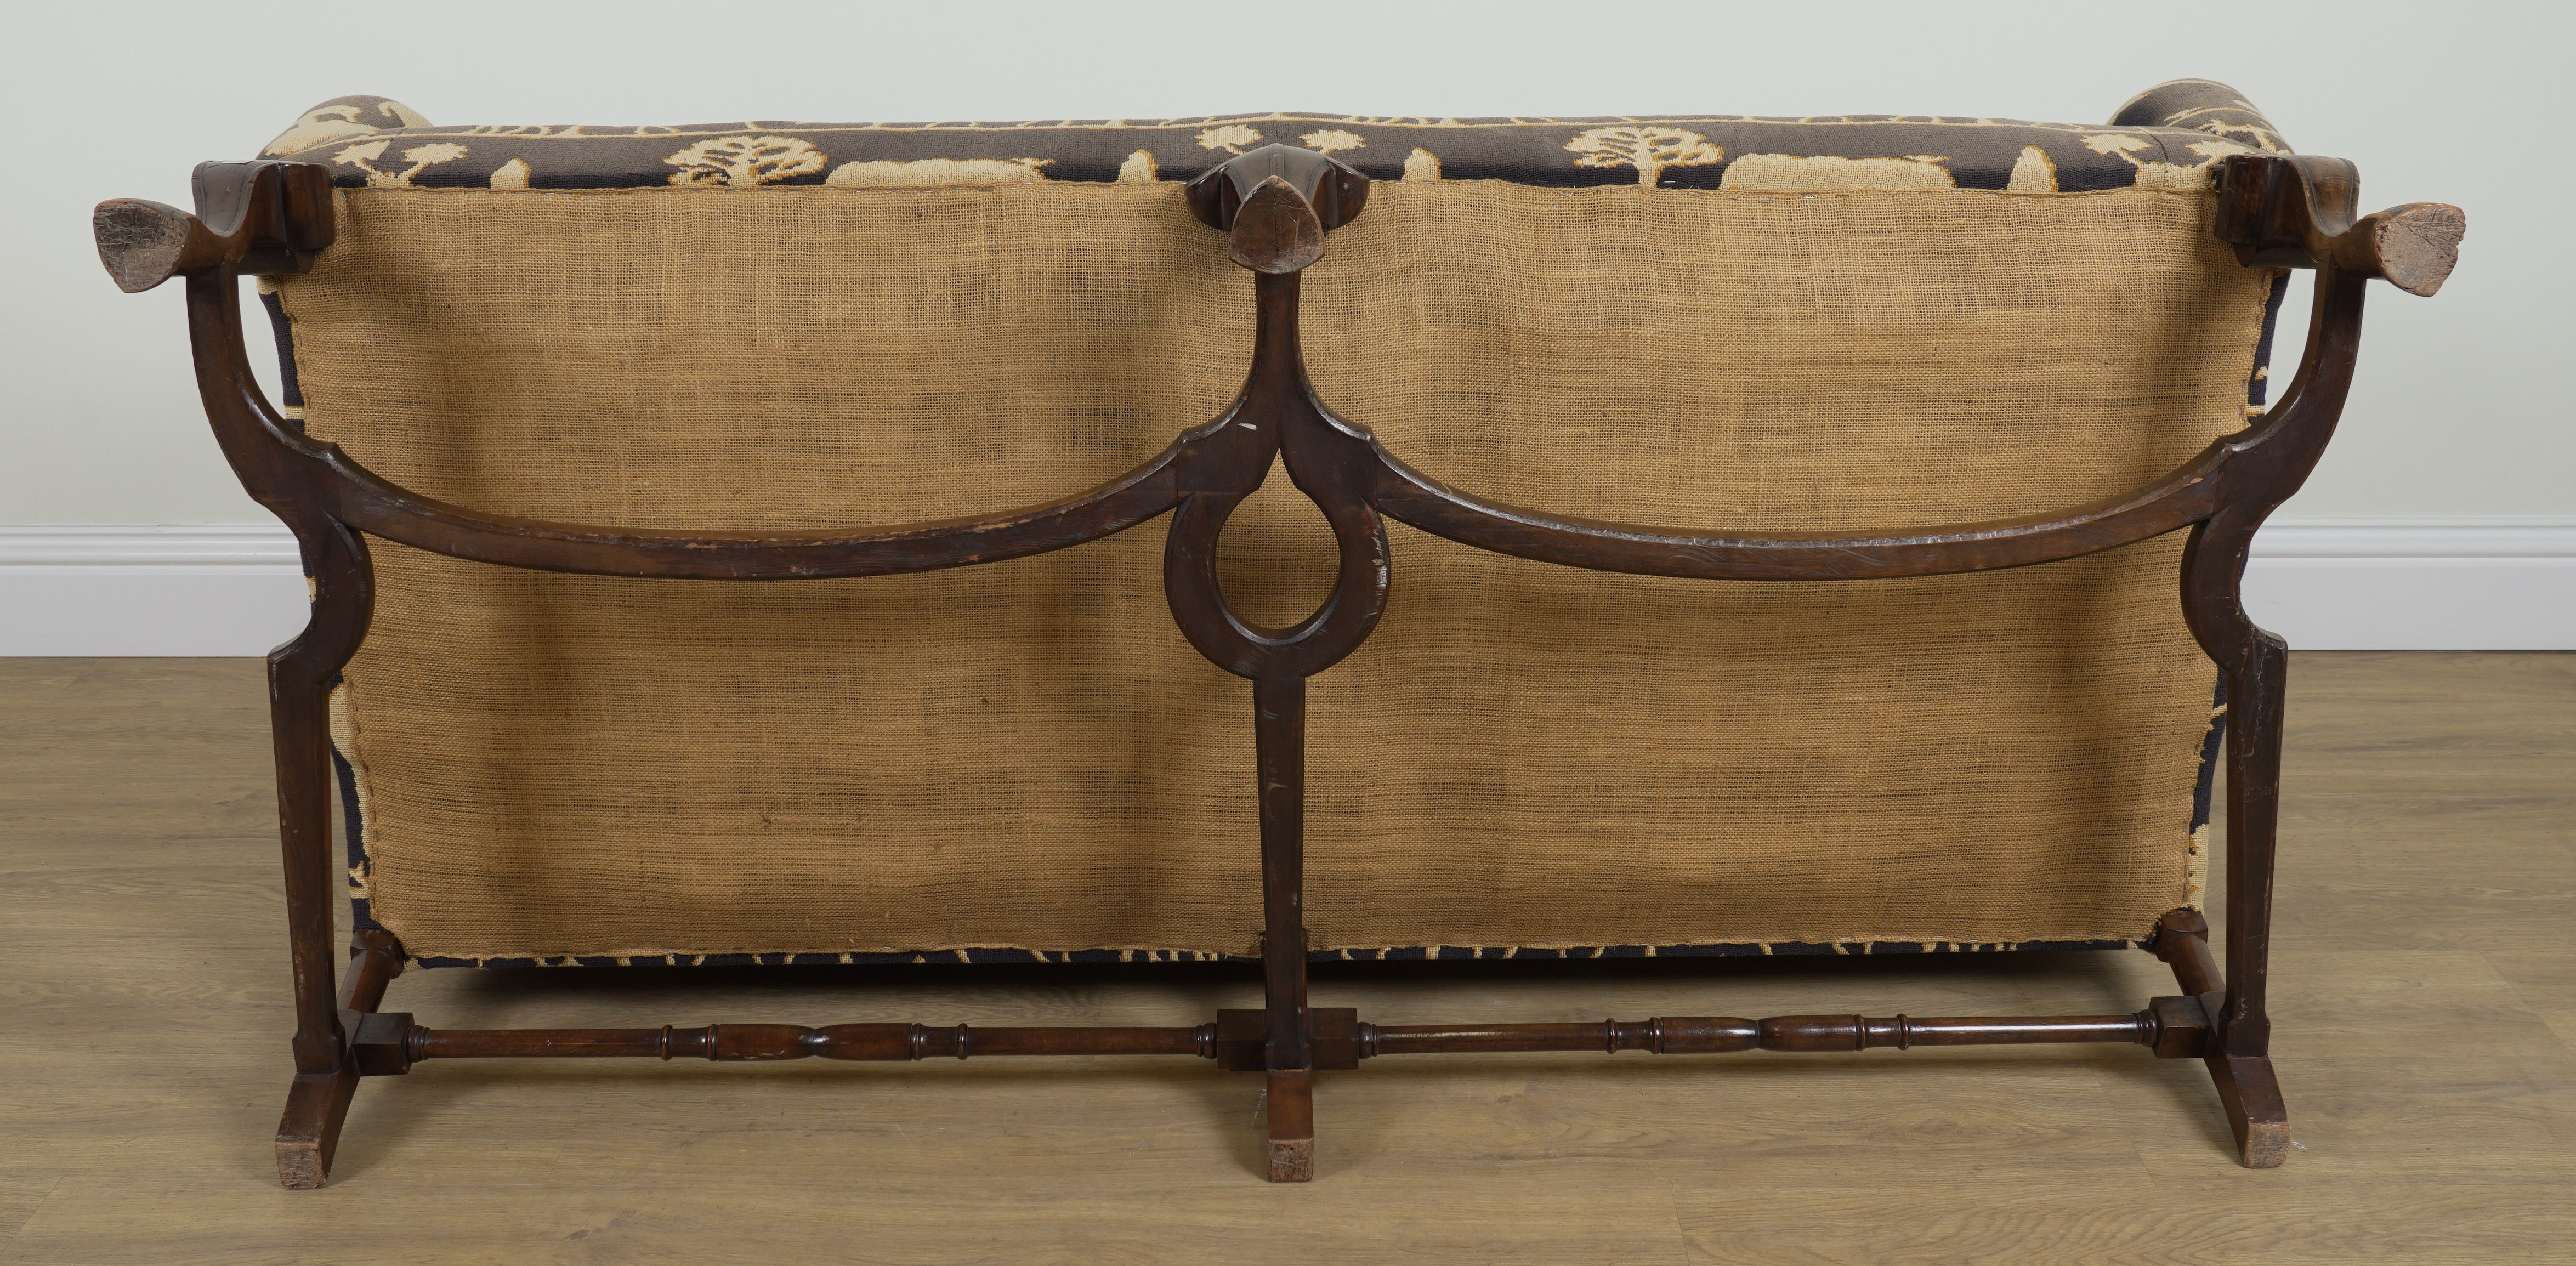 AN EARLY 18TH CENTURY STYLE HUMP BACK SOFA - Image 2 of 3